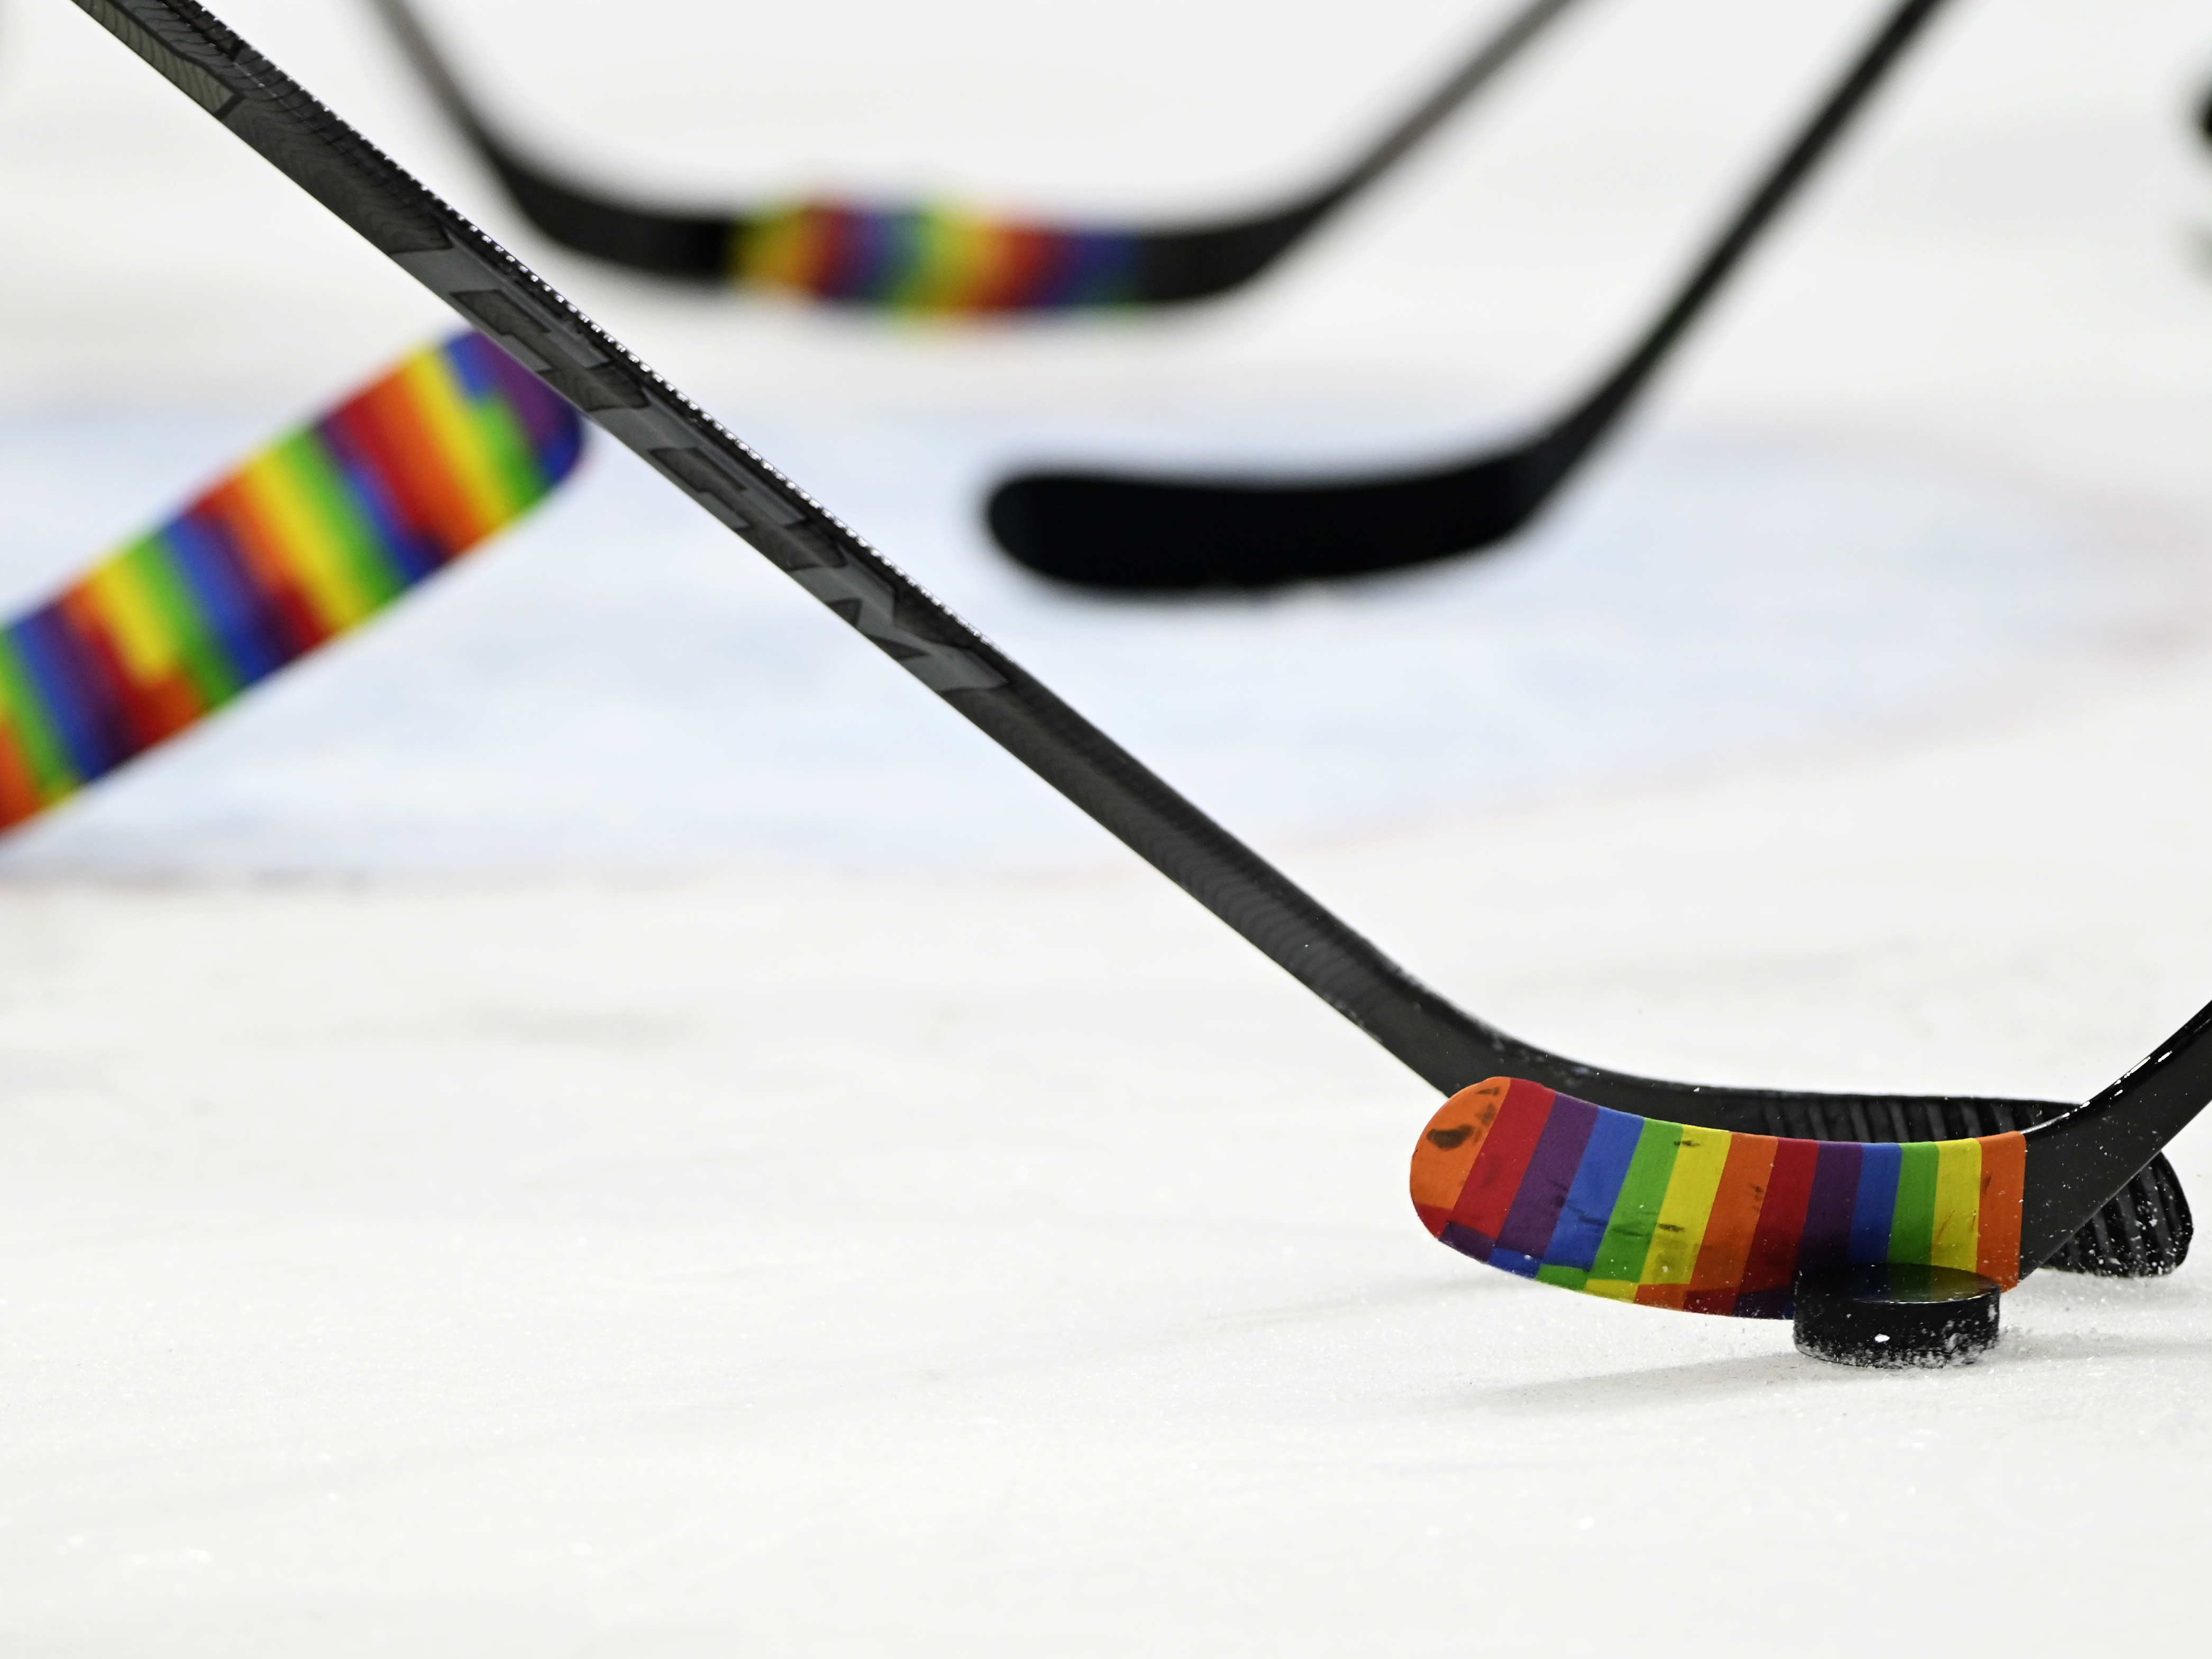 NHL Pride jersey policy criticized by Canadian LGBTQ+ group